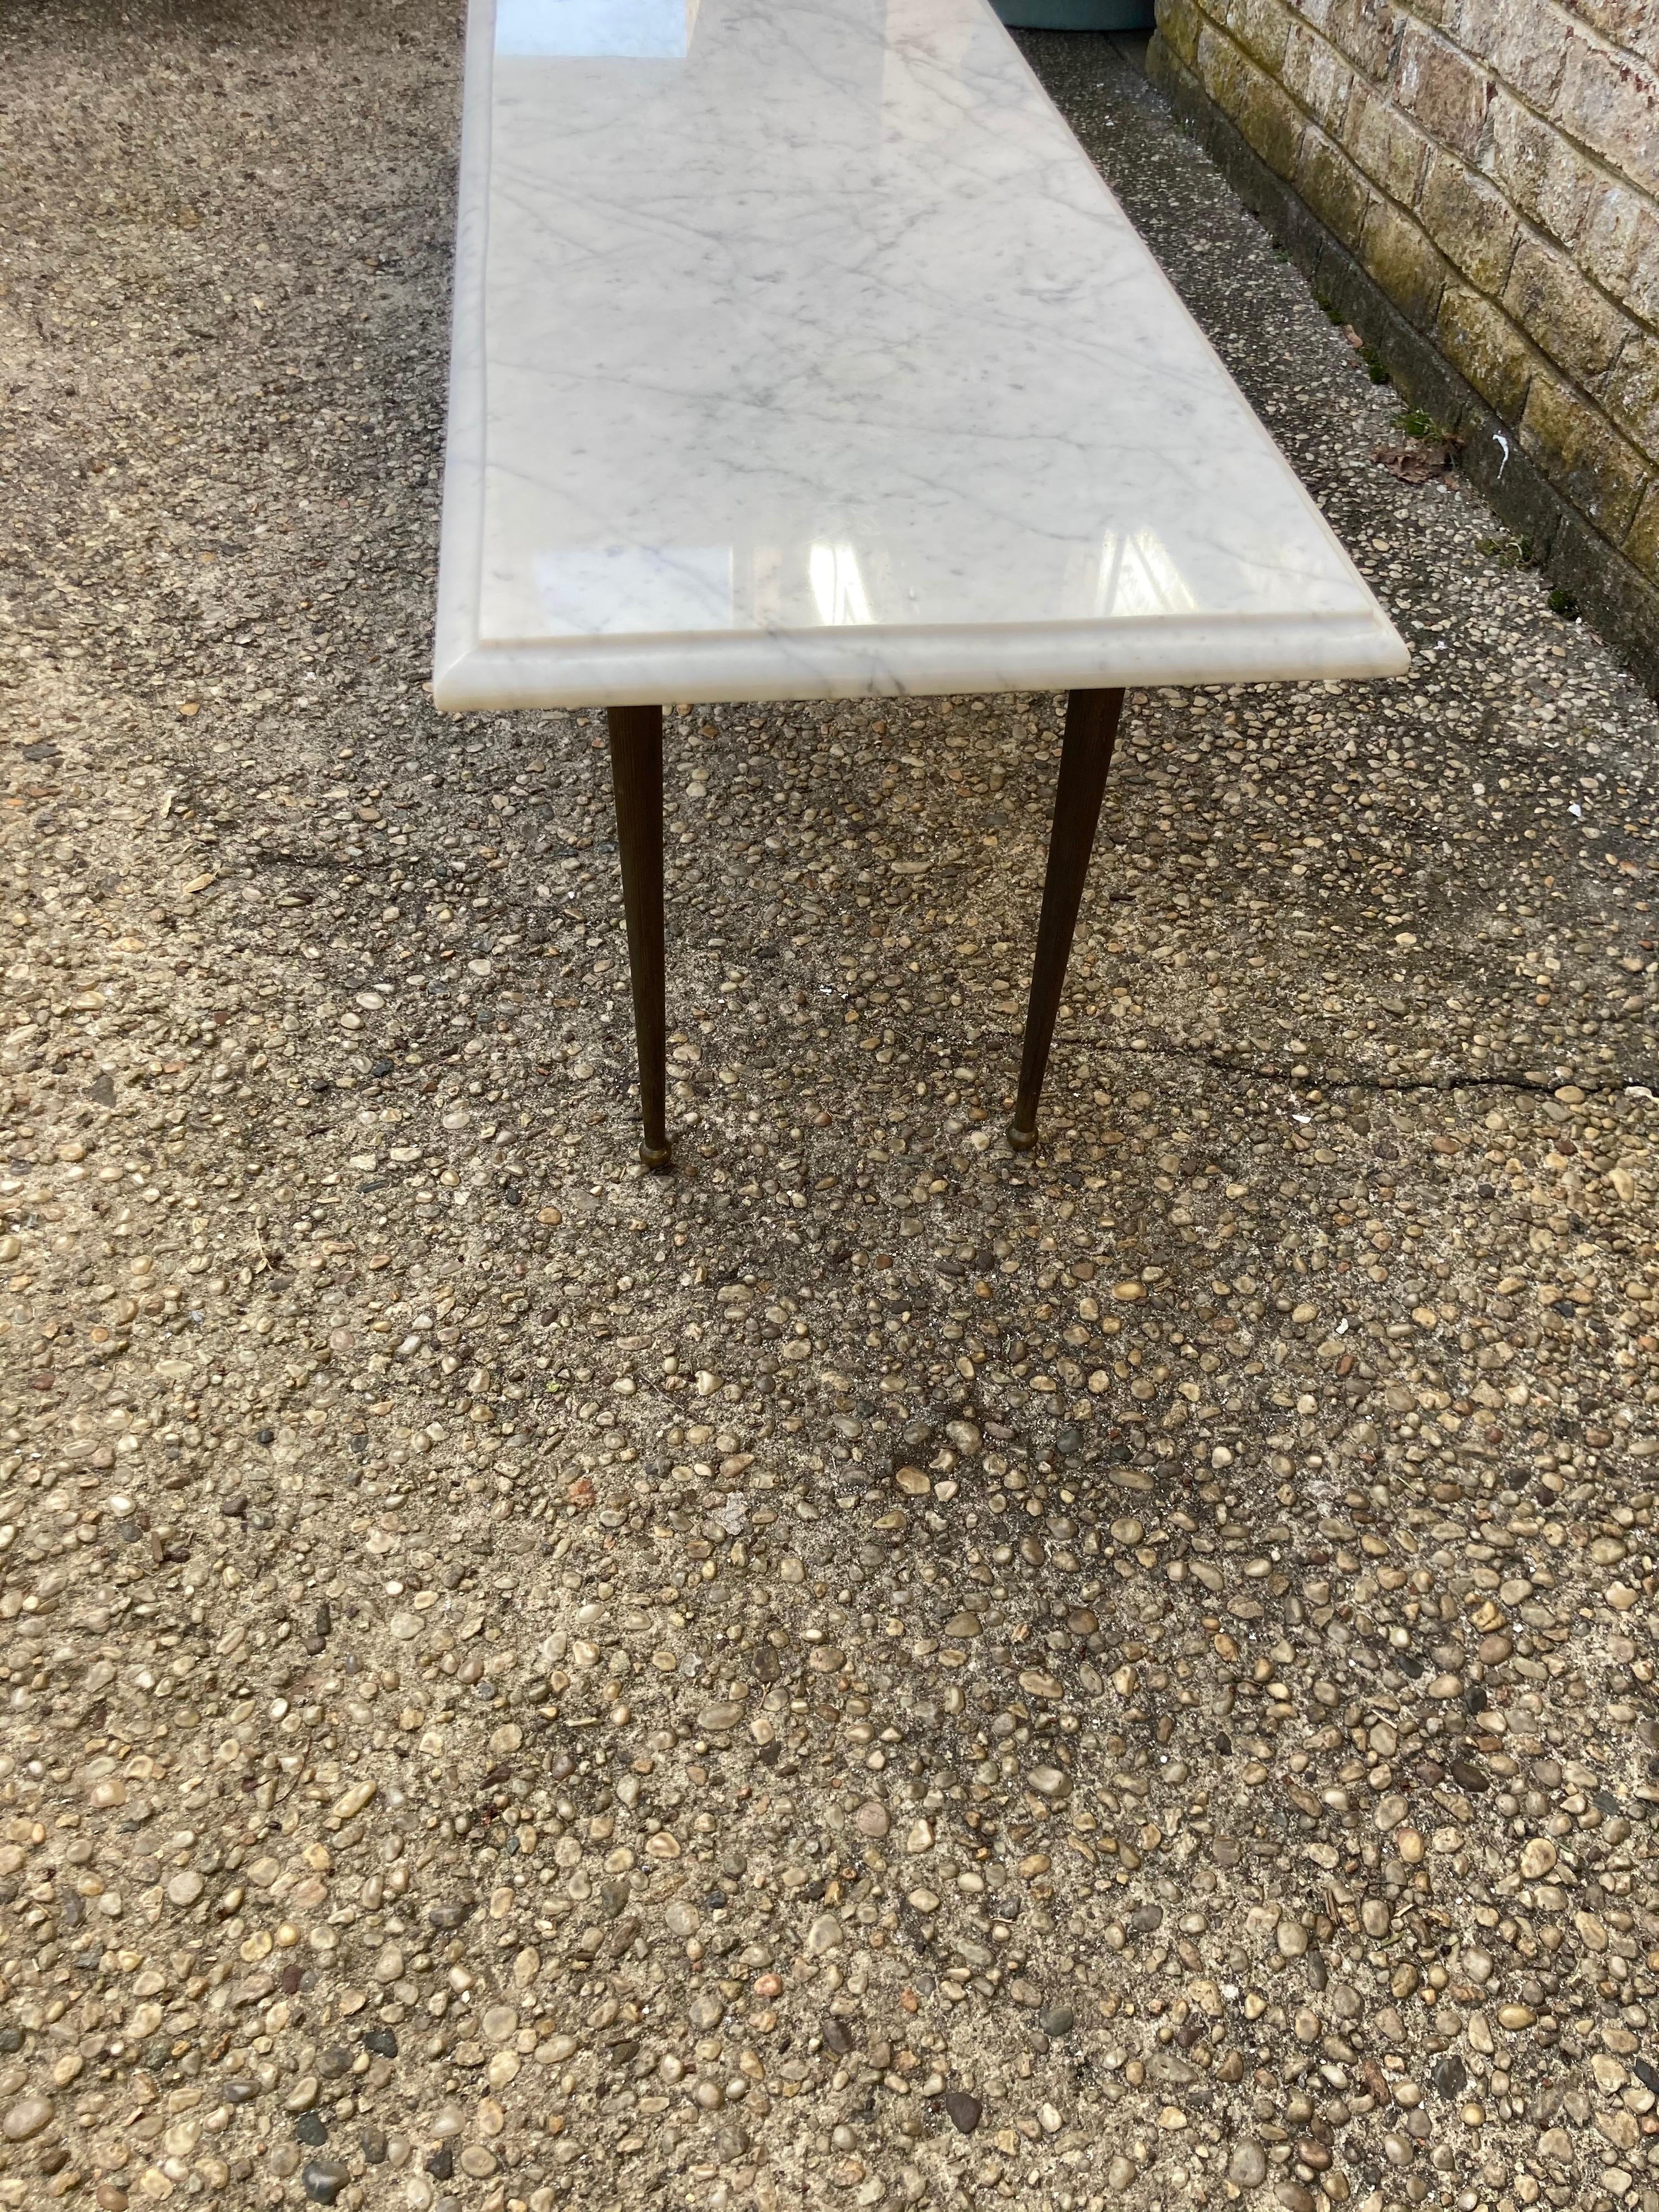 Fabulous long narrow coffee table / bench with a white / gray marble top with brass tapered and reeded legs ....a very unique size.